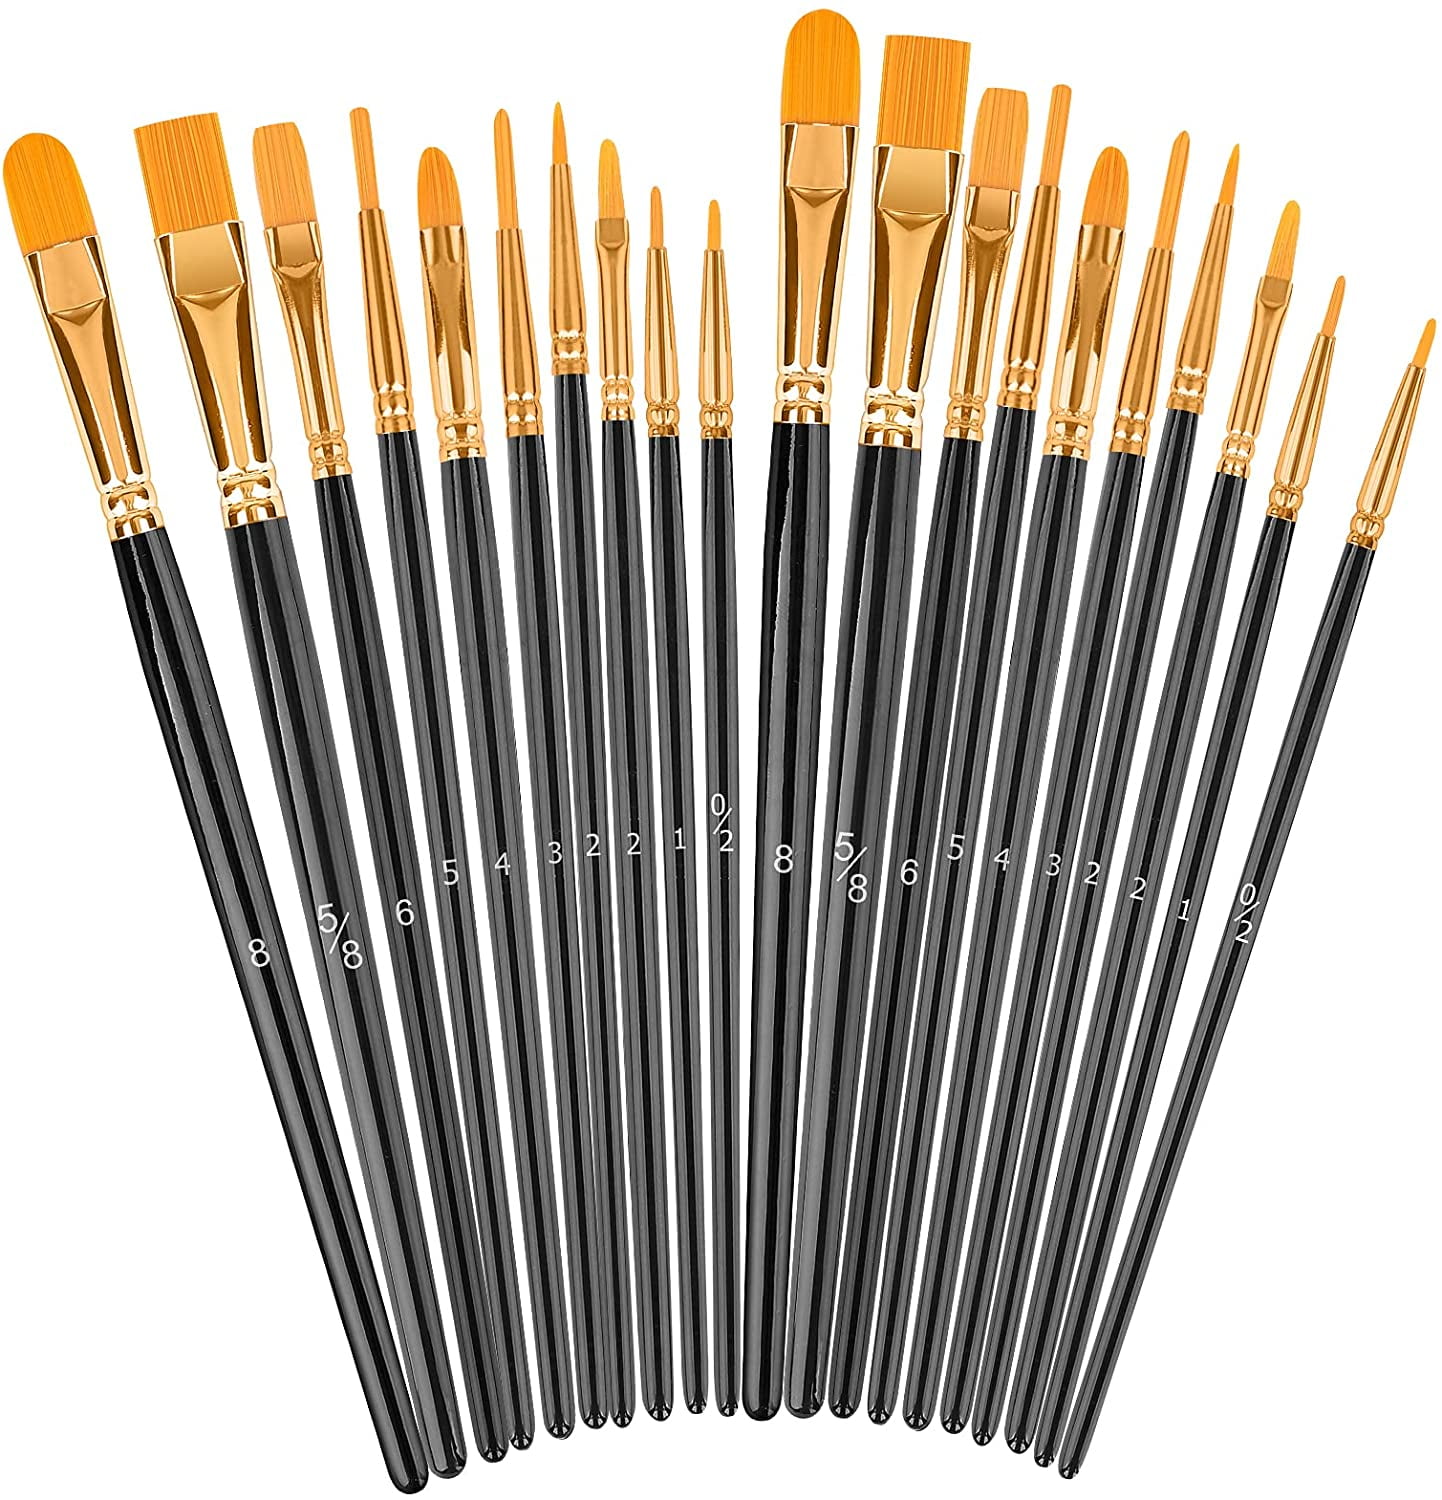 Paint Brushes Set, 2Pack 20 Pcs Paint Brushes for Acrylic Painting, Oil Watercolor Acrylic Paint Brush,, Kids Adult Drawing Arts Crafts Supplies, Blue